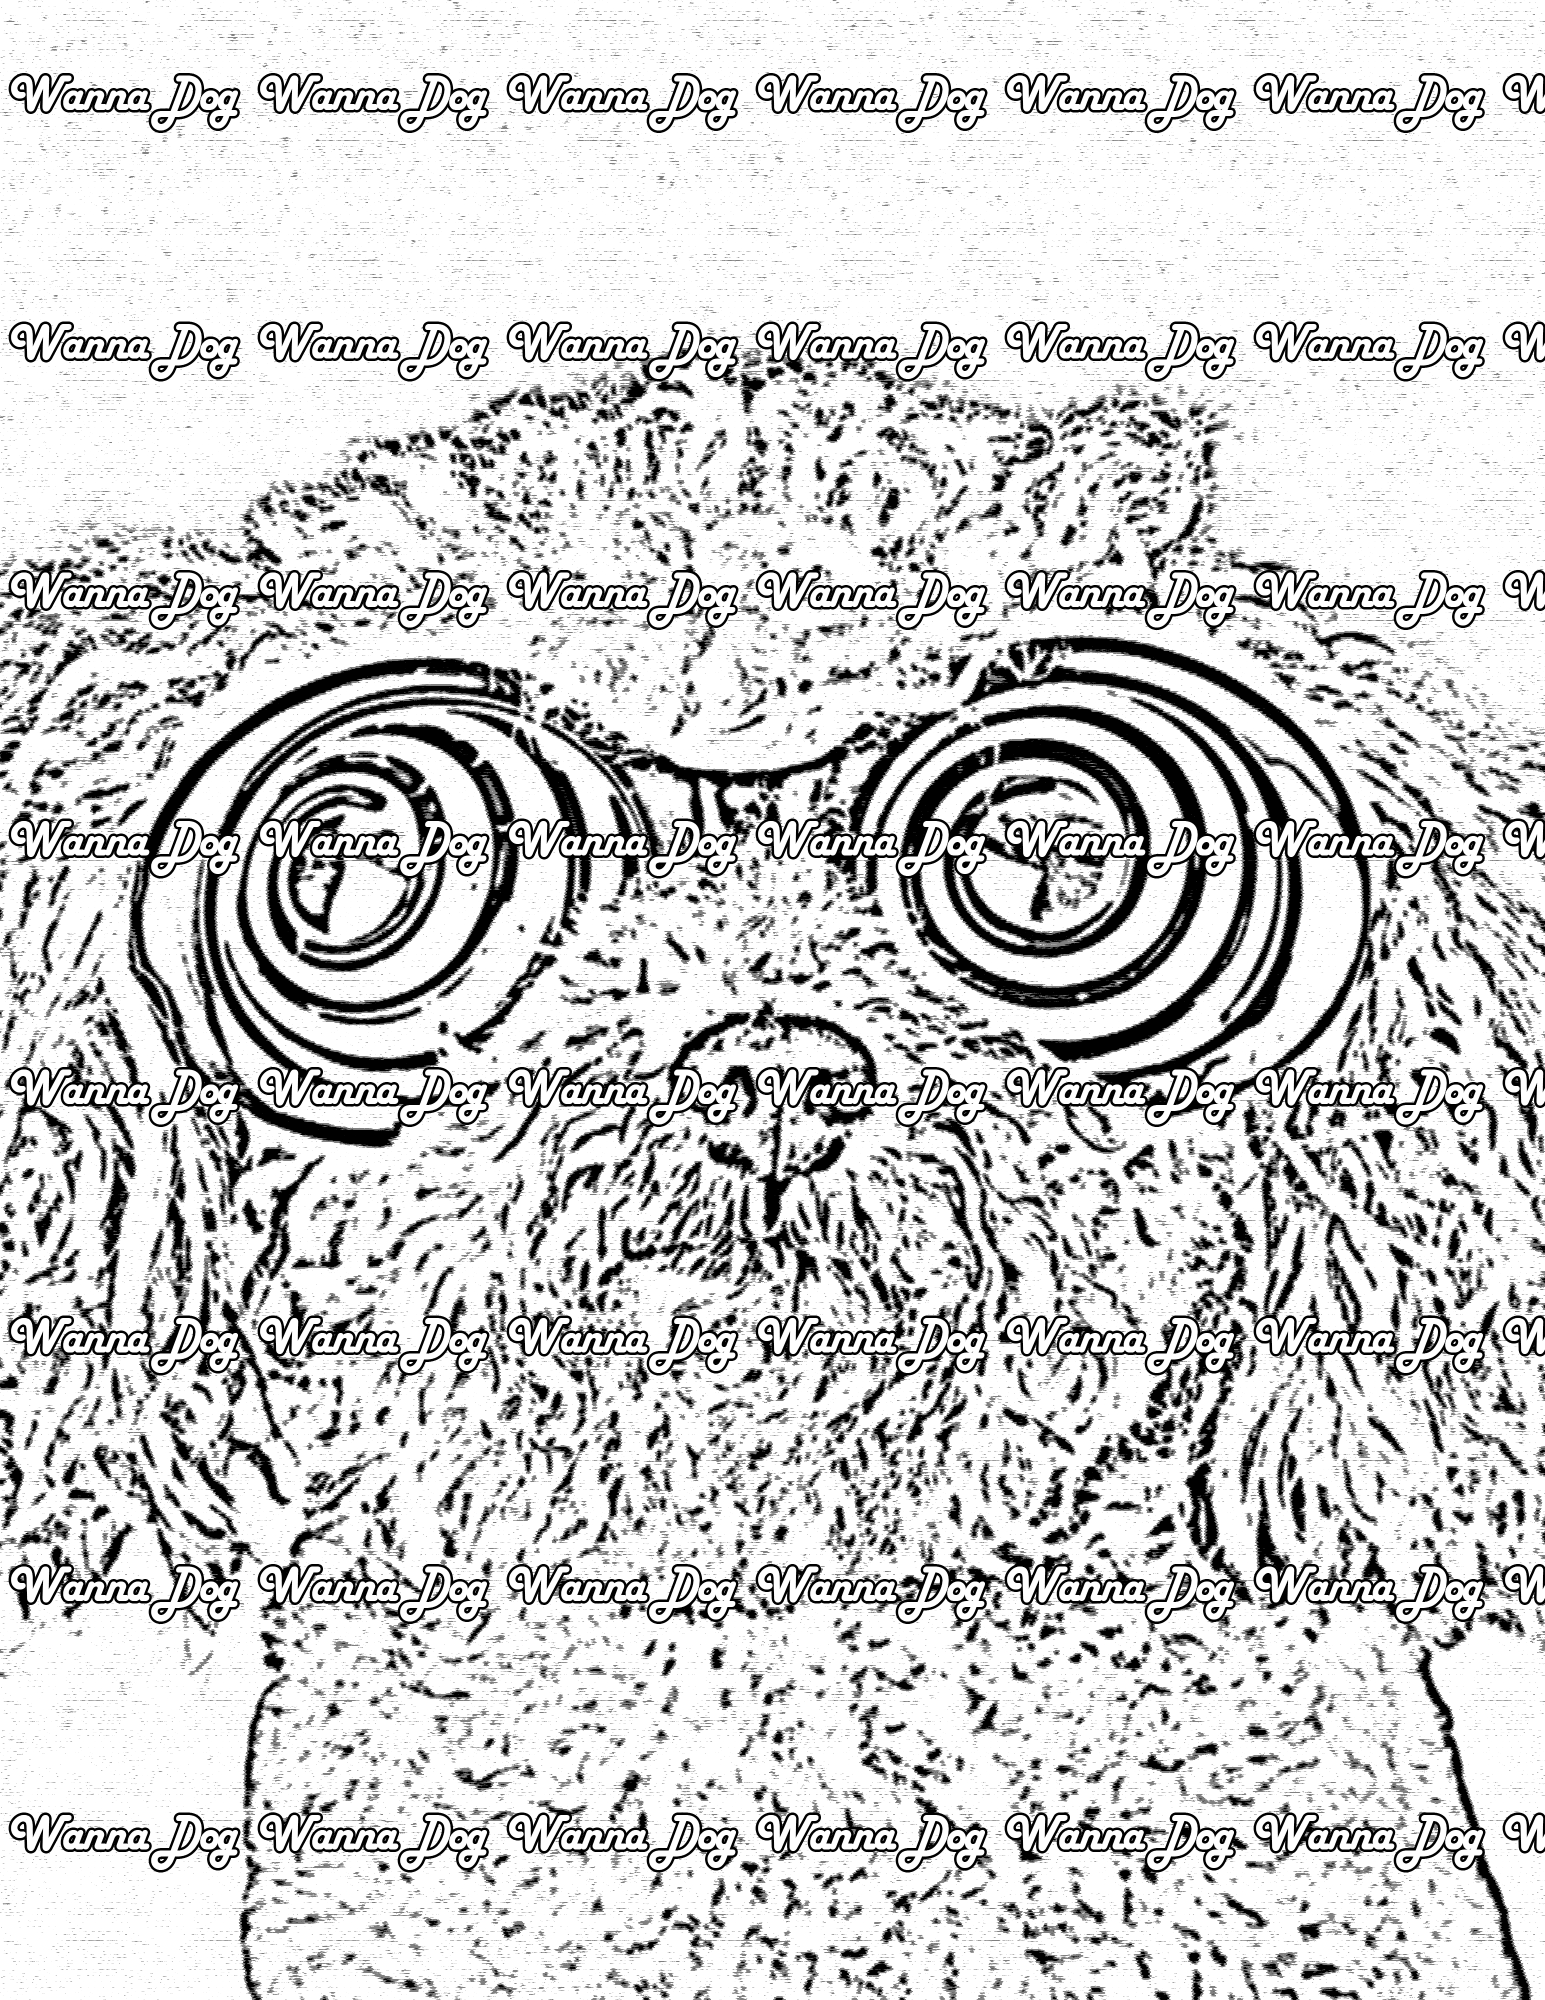 Poodle Coloring Page of a Poodle wearing hypnosis glasses